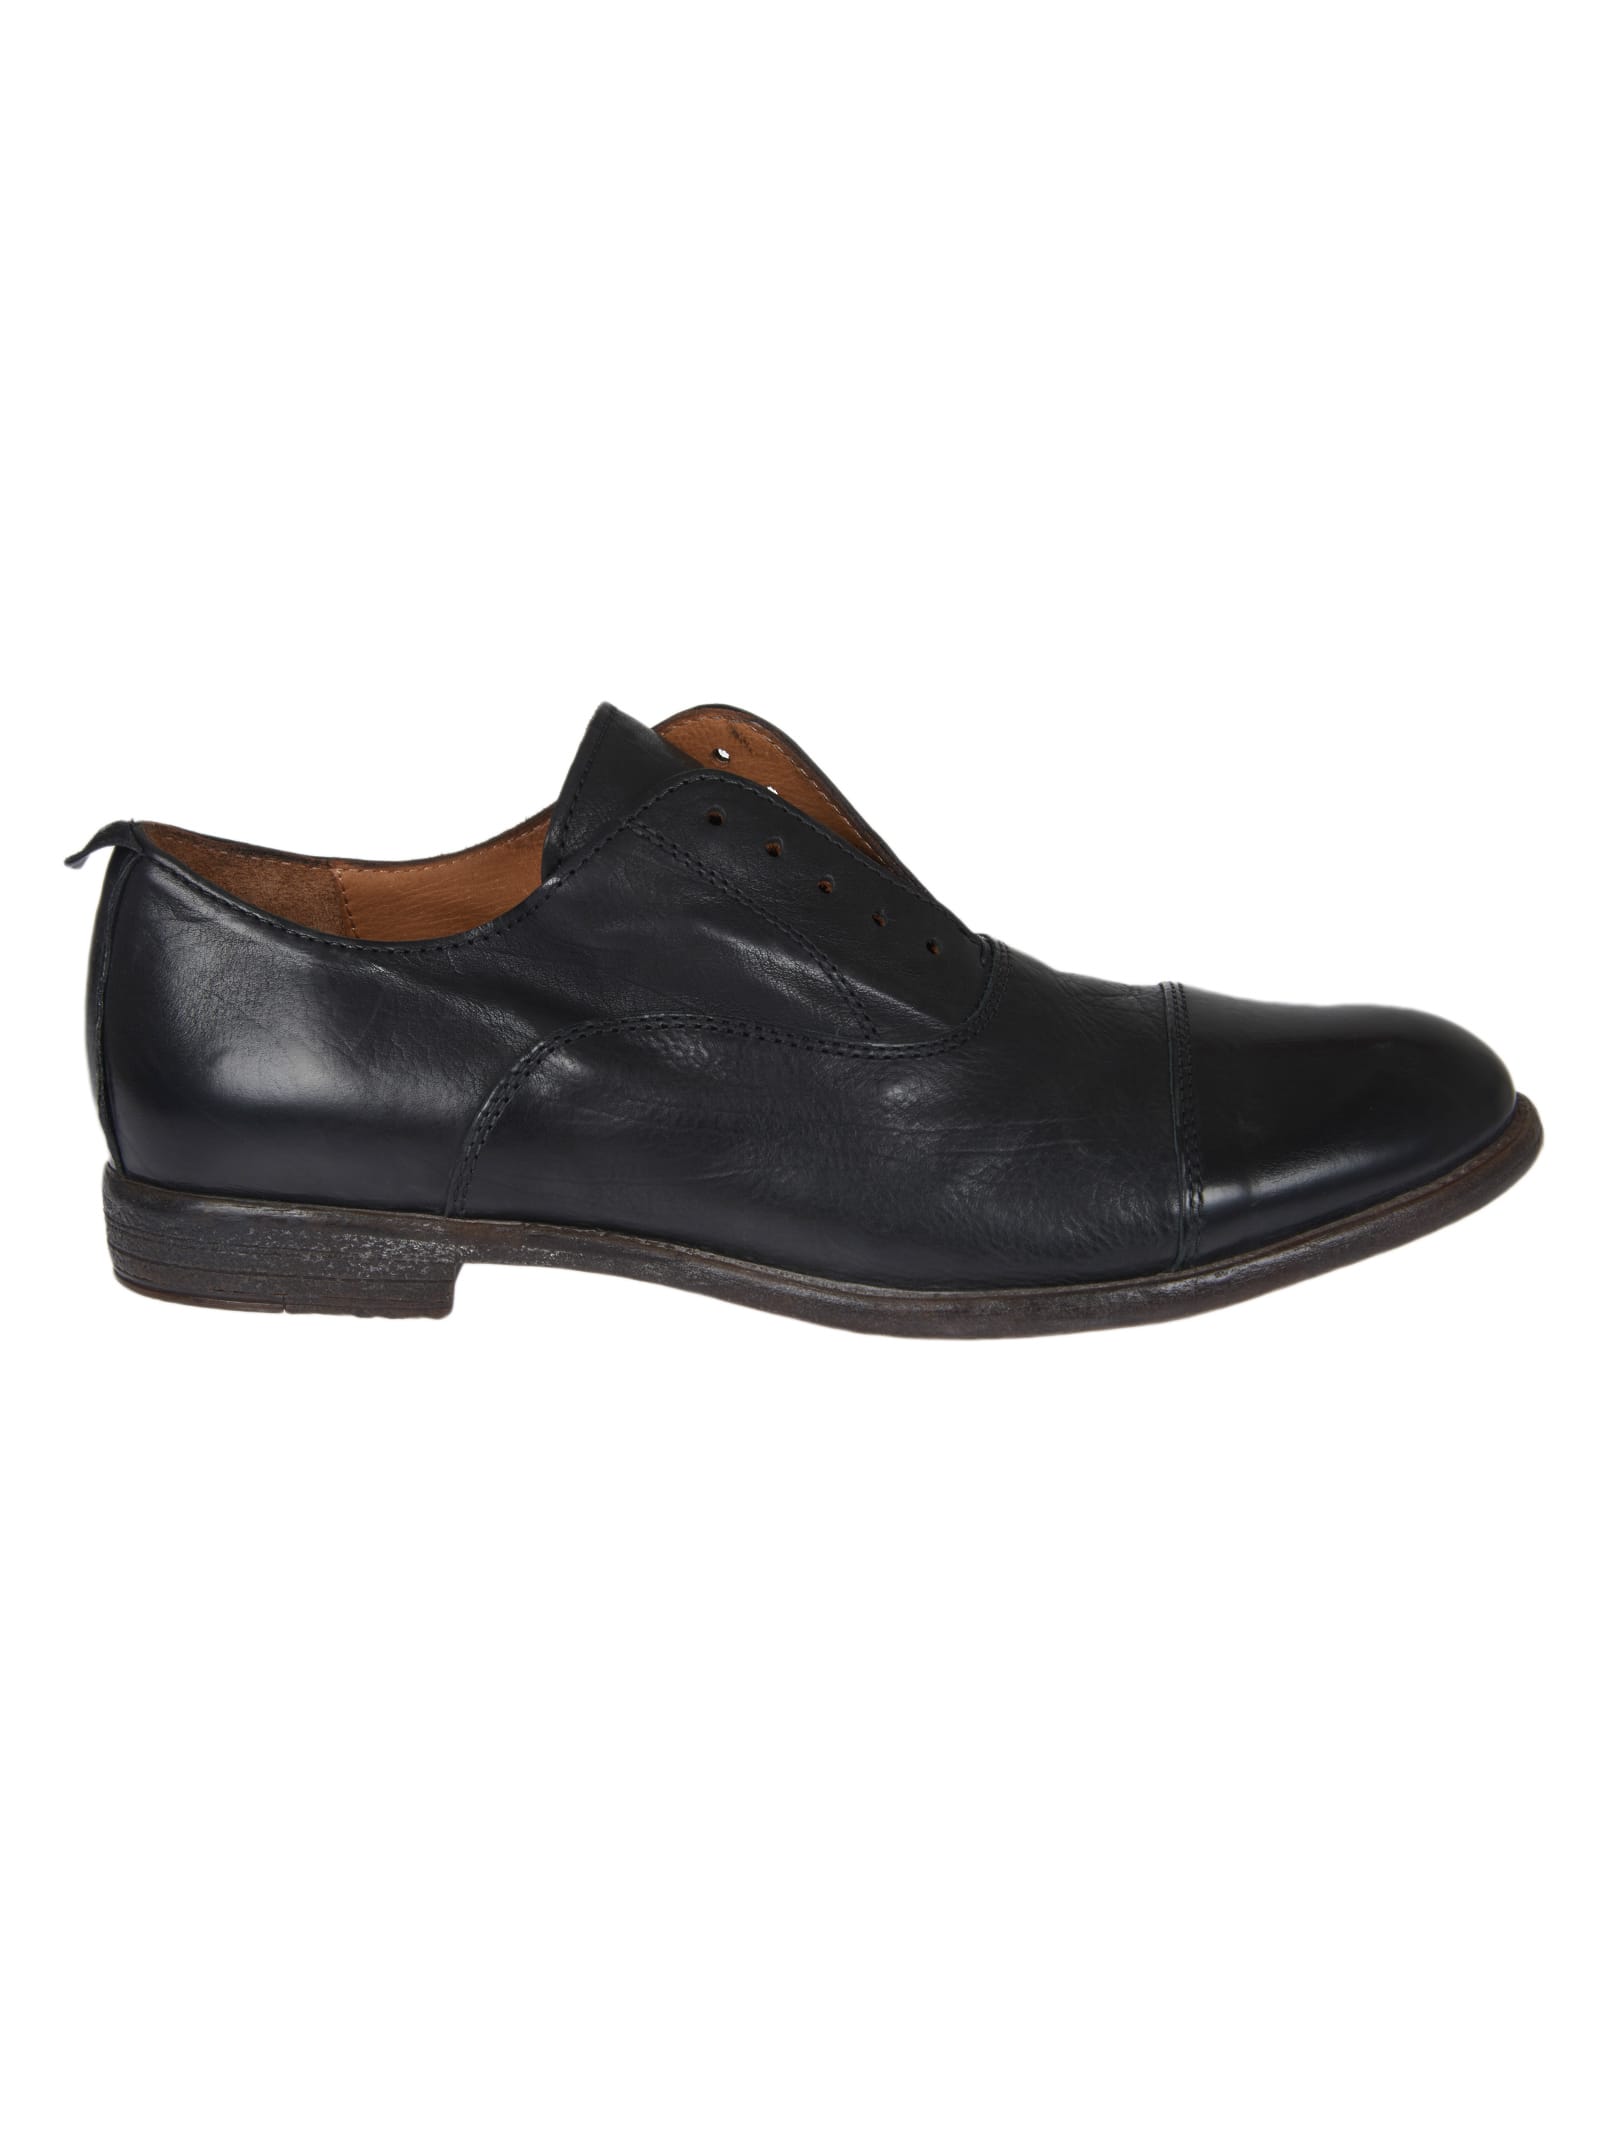 Moma Black Leather Shoes